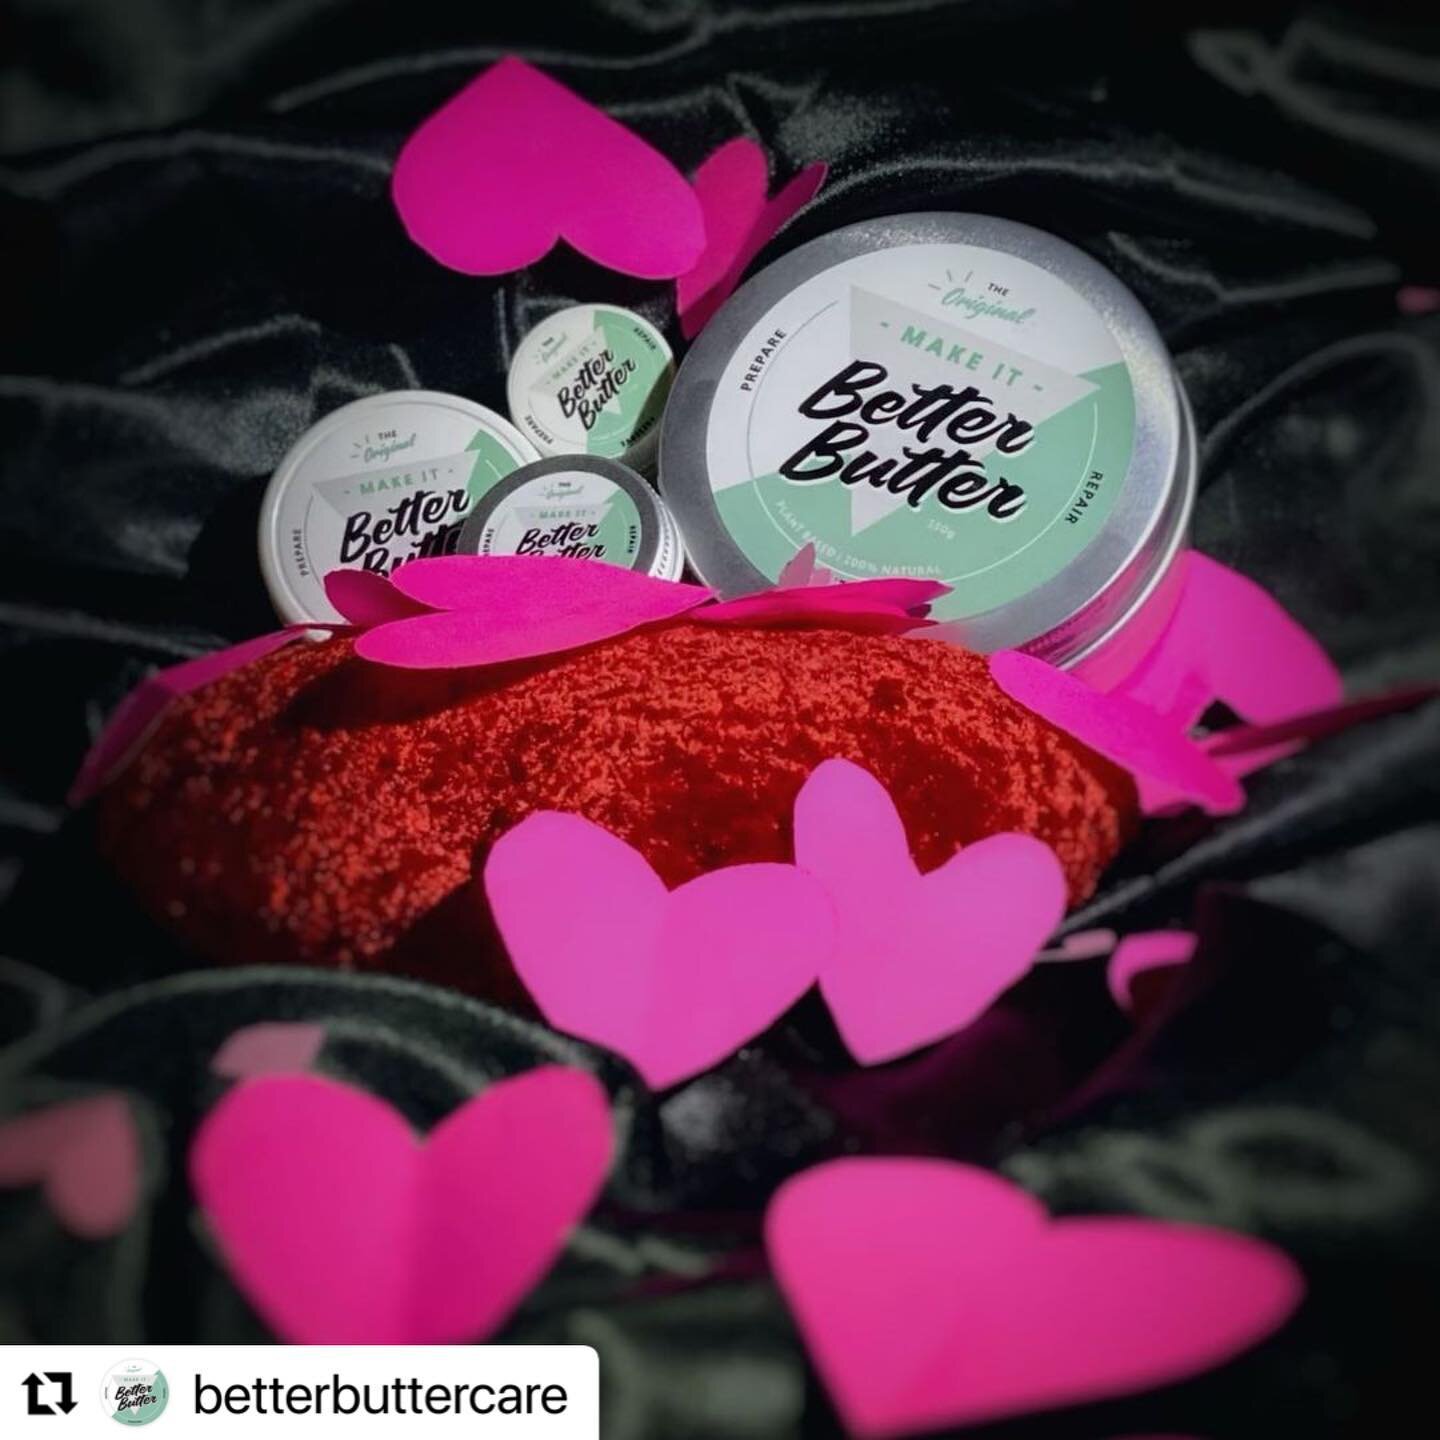 #repost ✨✨giveaway alert✨✨

Head to the original post with this same image to get all the details and enter to win some freeeee Better Butter Care which you can keep all for yourself or share with friends 💚🌿
*
*
*
*
*
#giveaway #contest #valentines